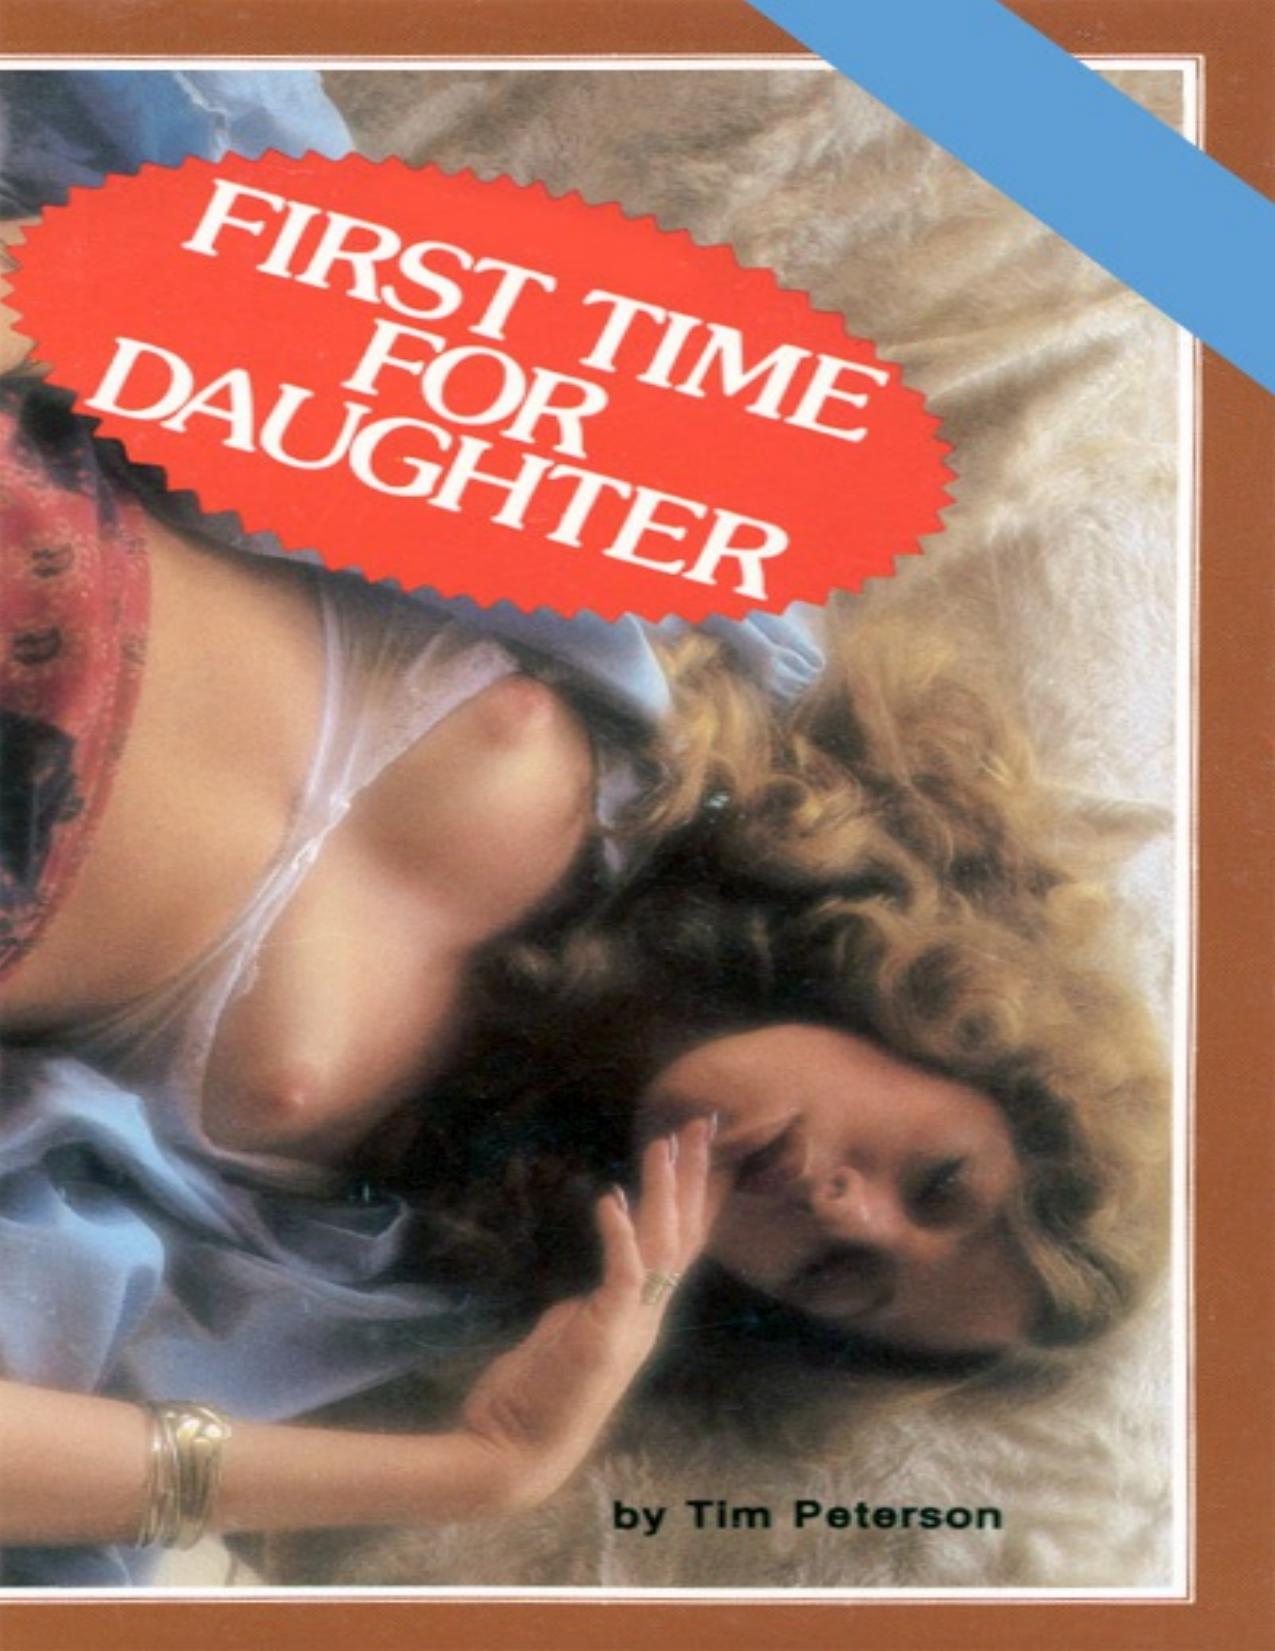 First Time For Daughter by Tim Peterson